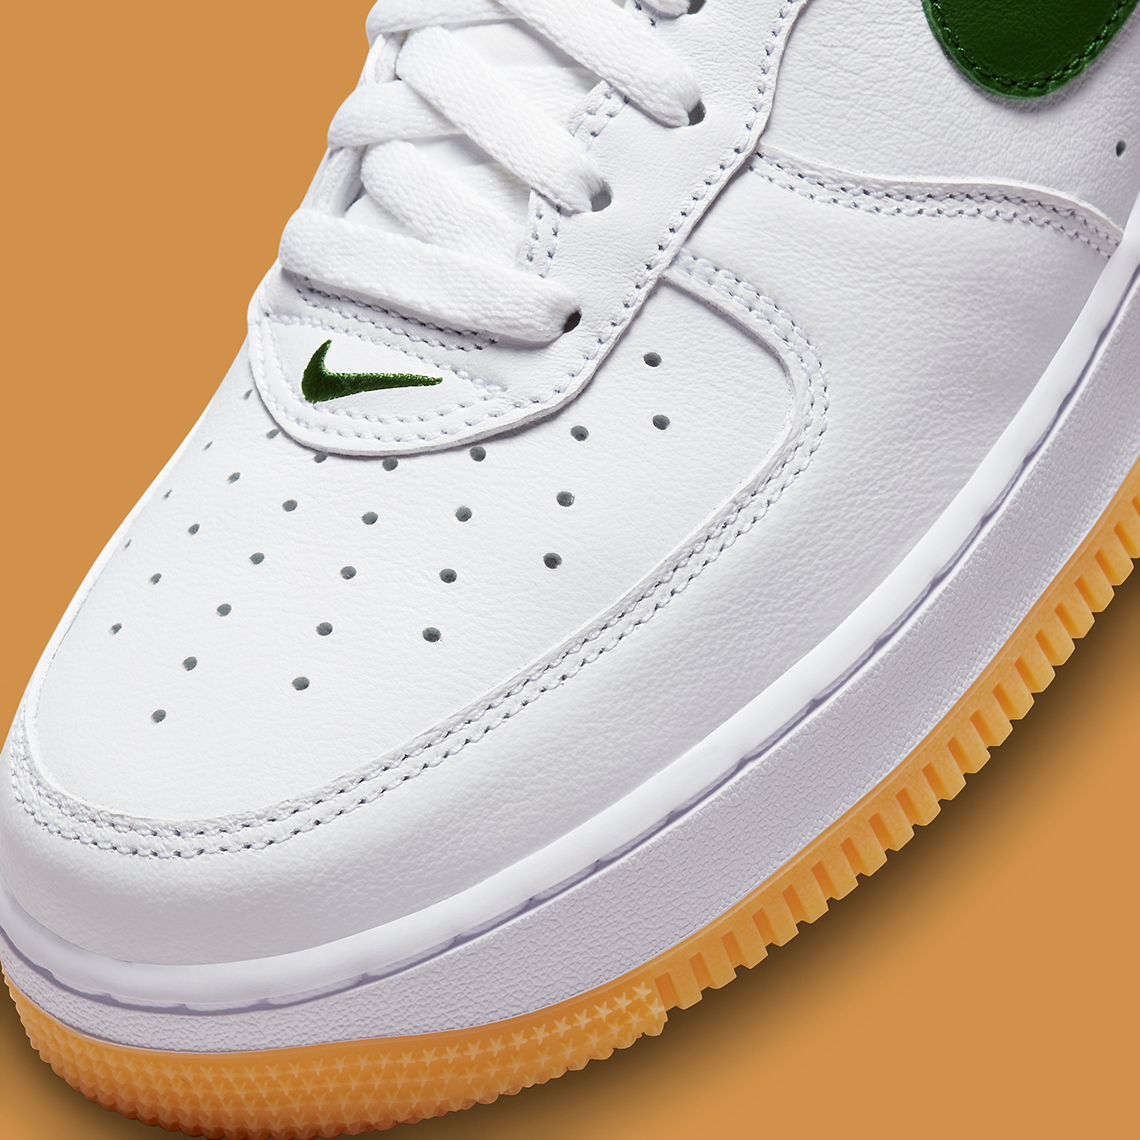 nike special field air force 1 faded hair color Release Details -  StclaircomoShops - nike special field air force 1 faded hair color